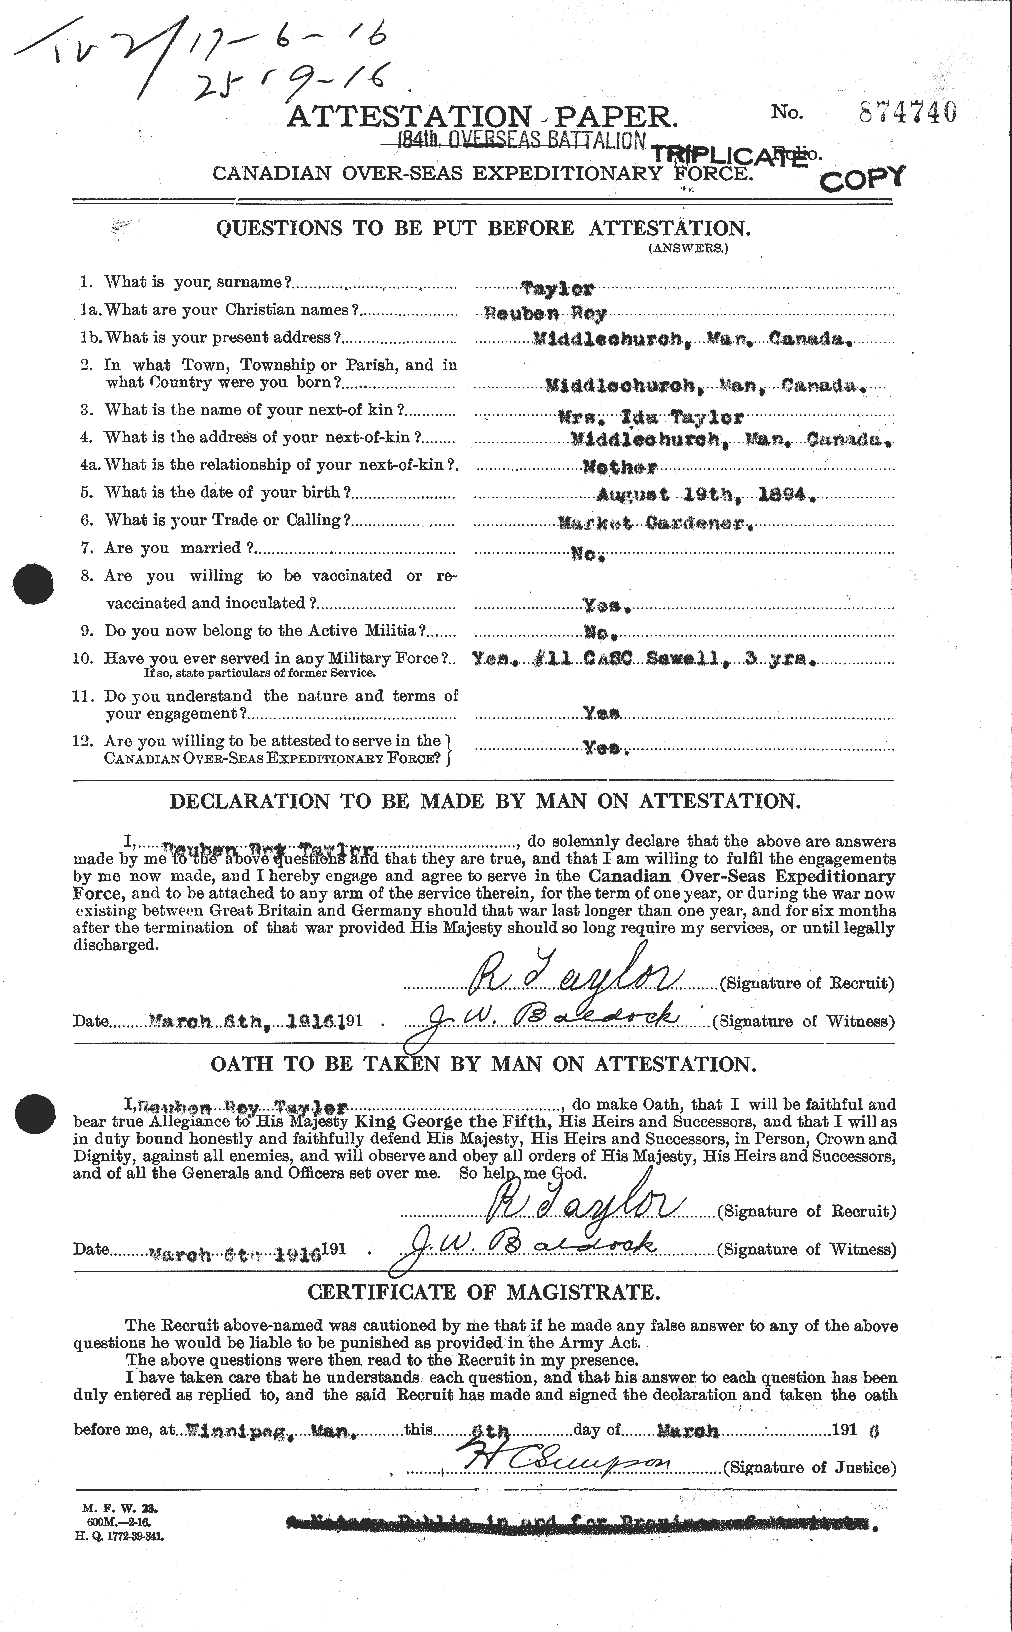 Personnel Records of the First World War - CEF 627812a